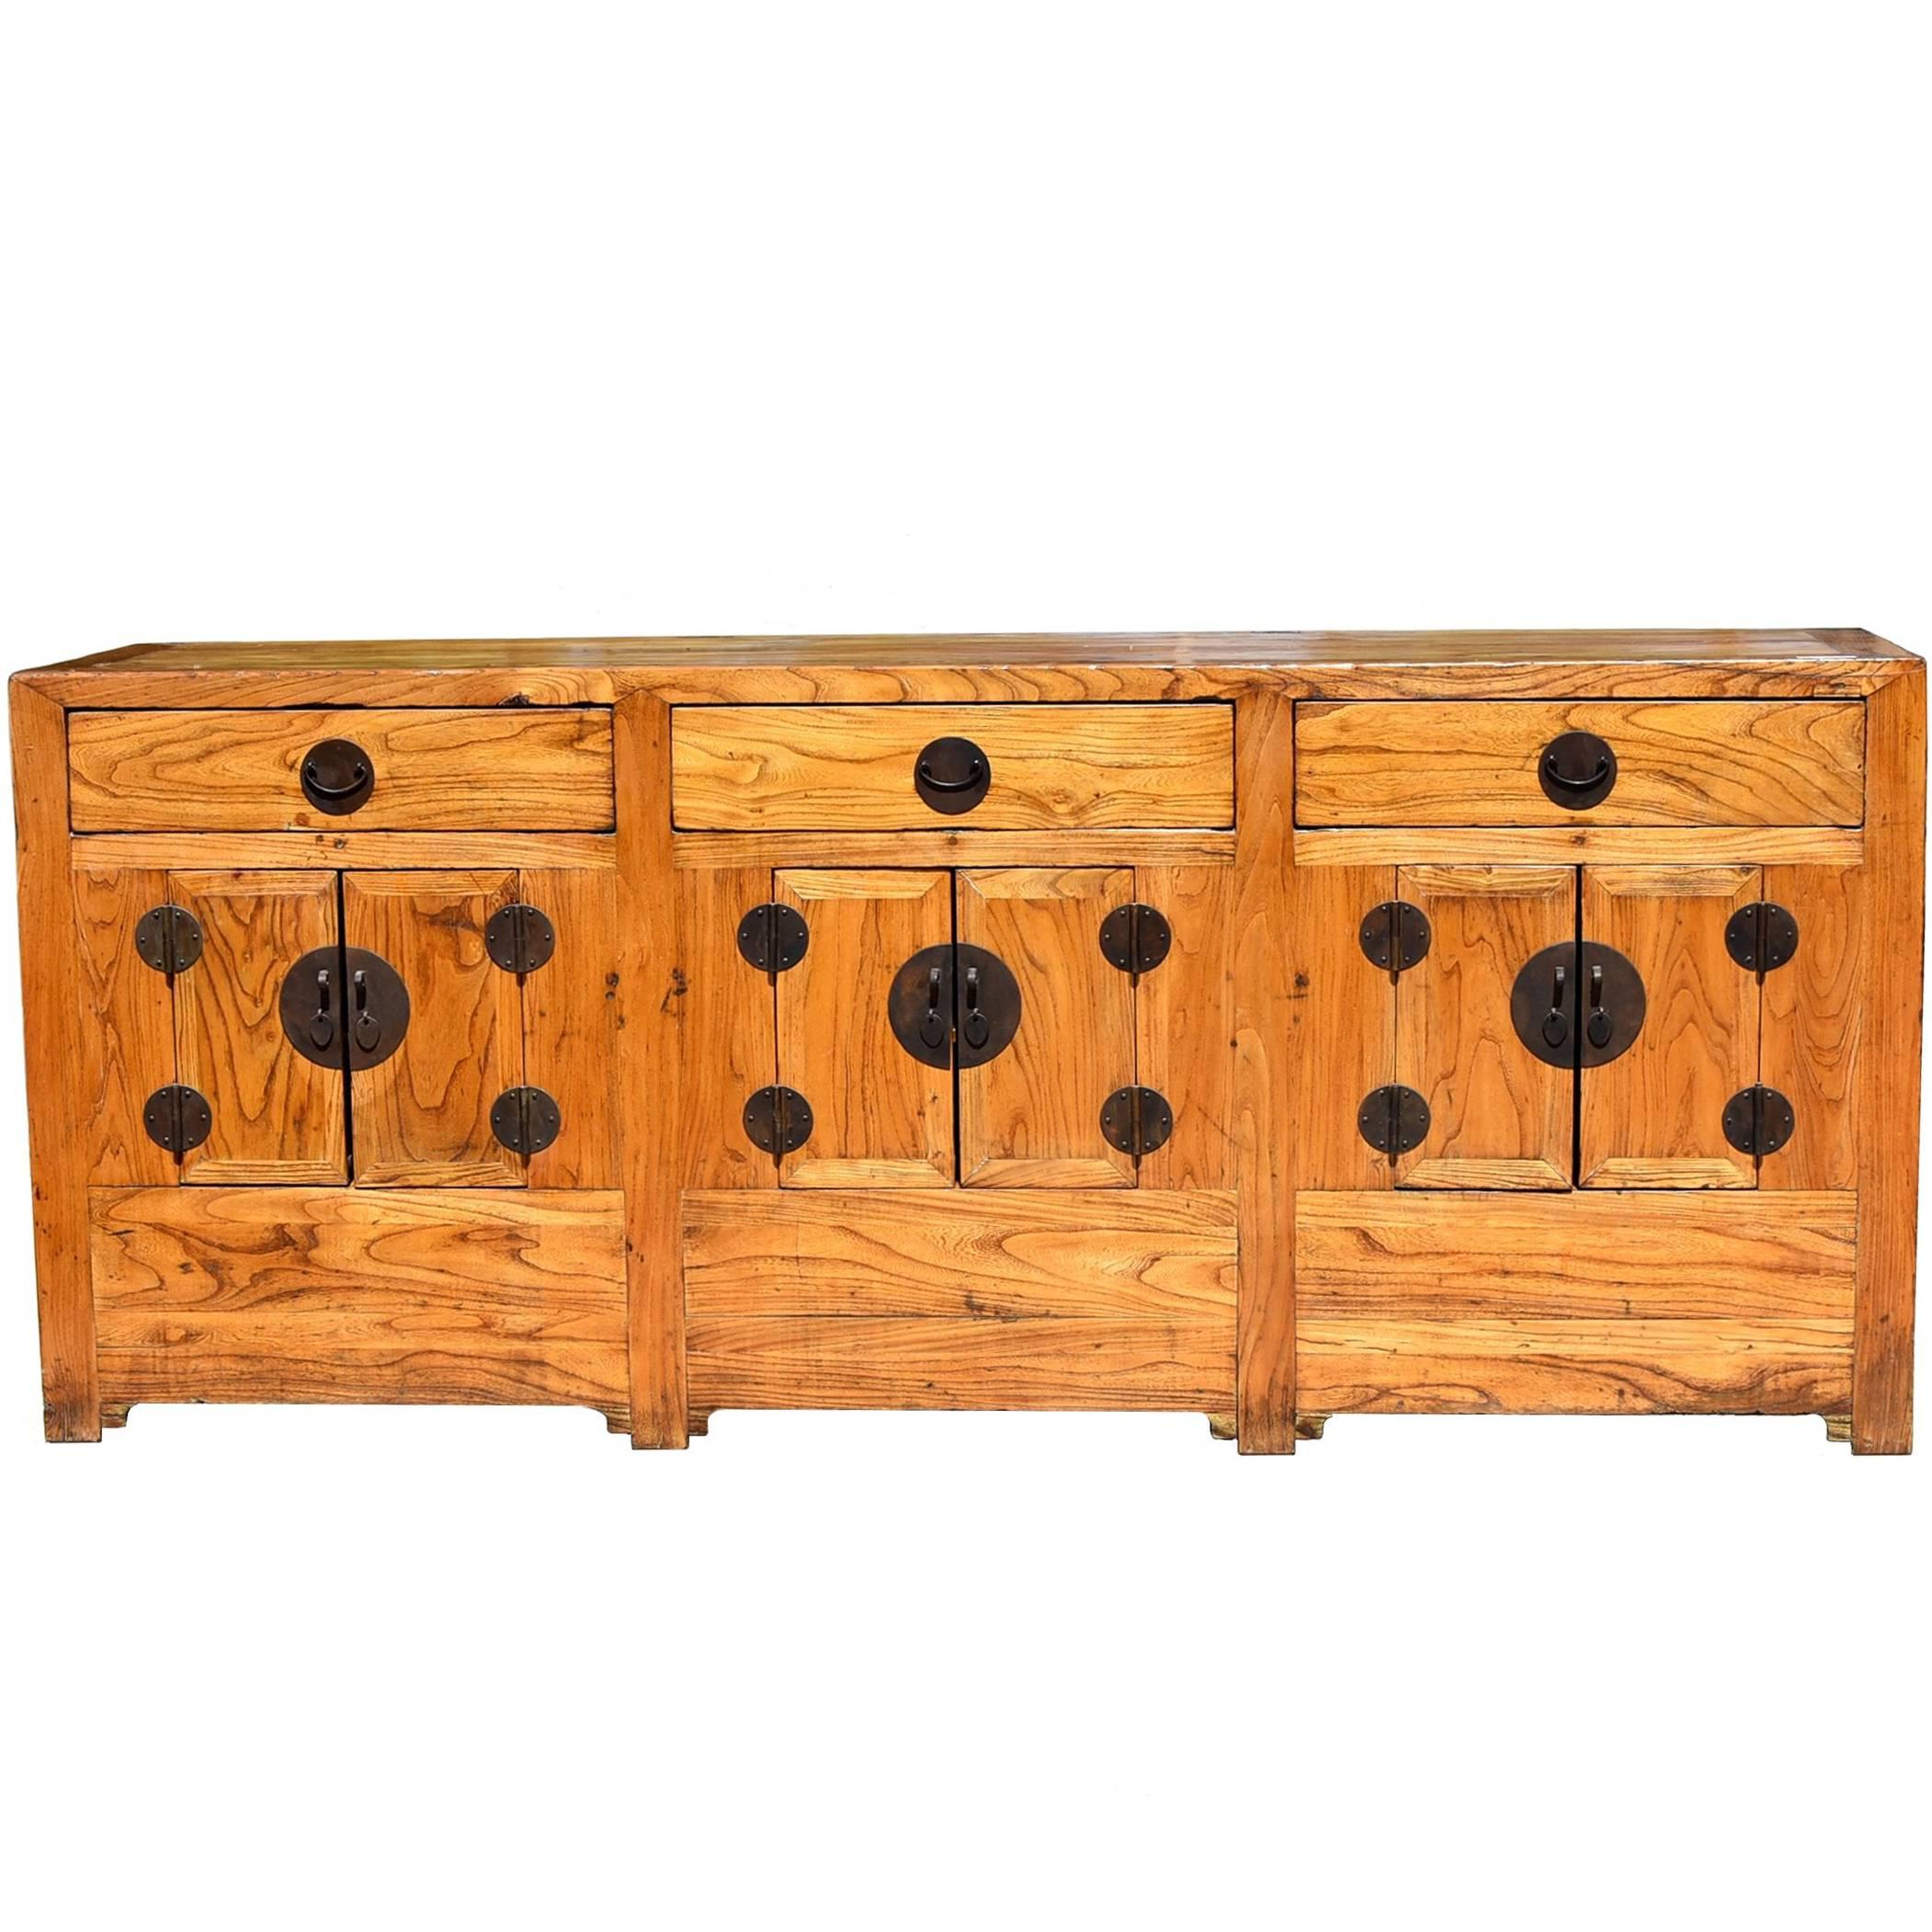 Antique Solid Elm Wood Sideboard, Natural Finish, Northern Chinese